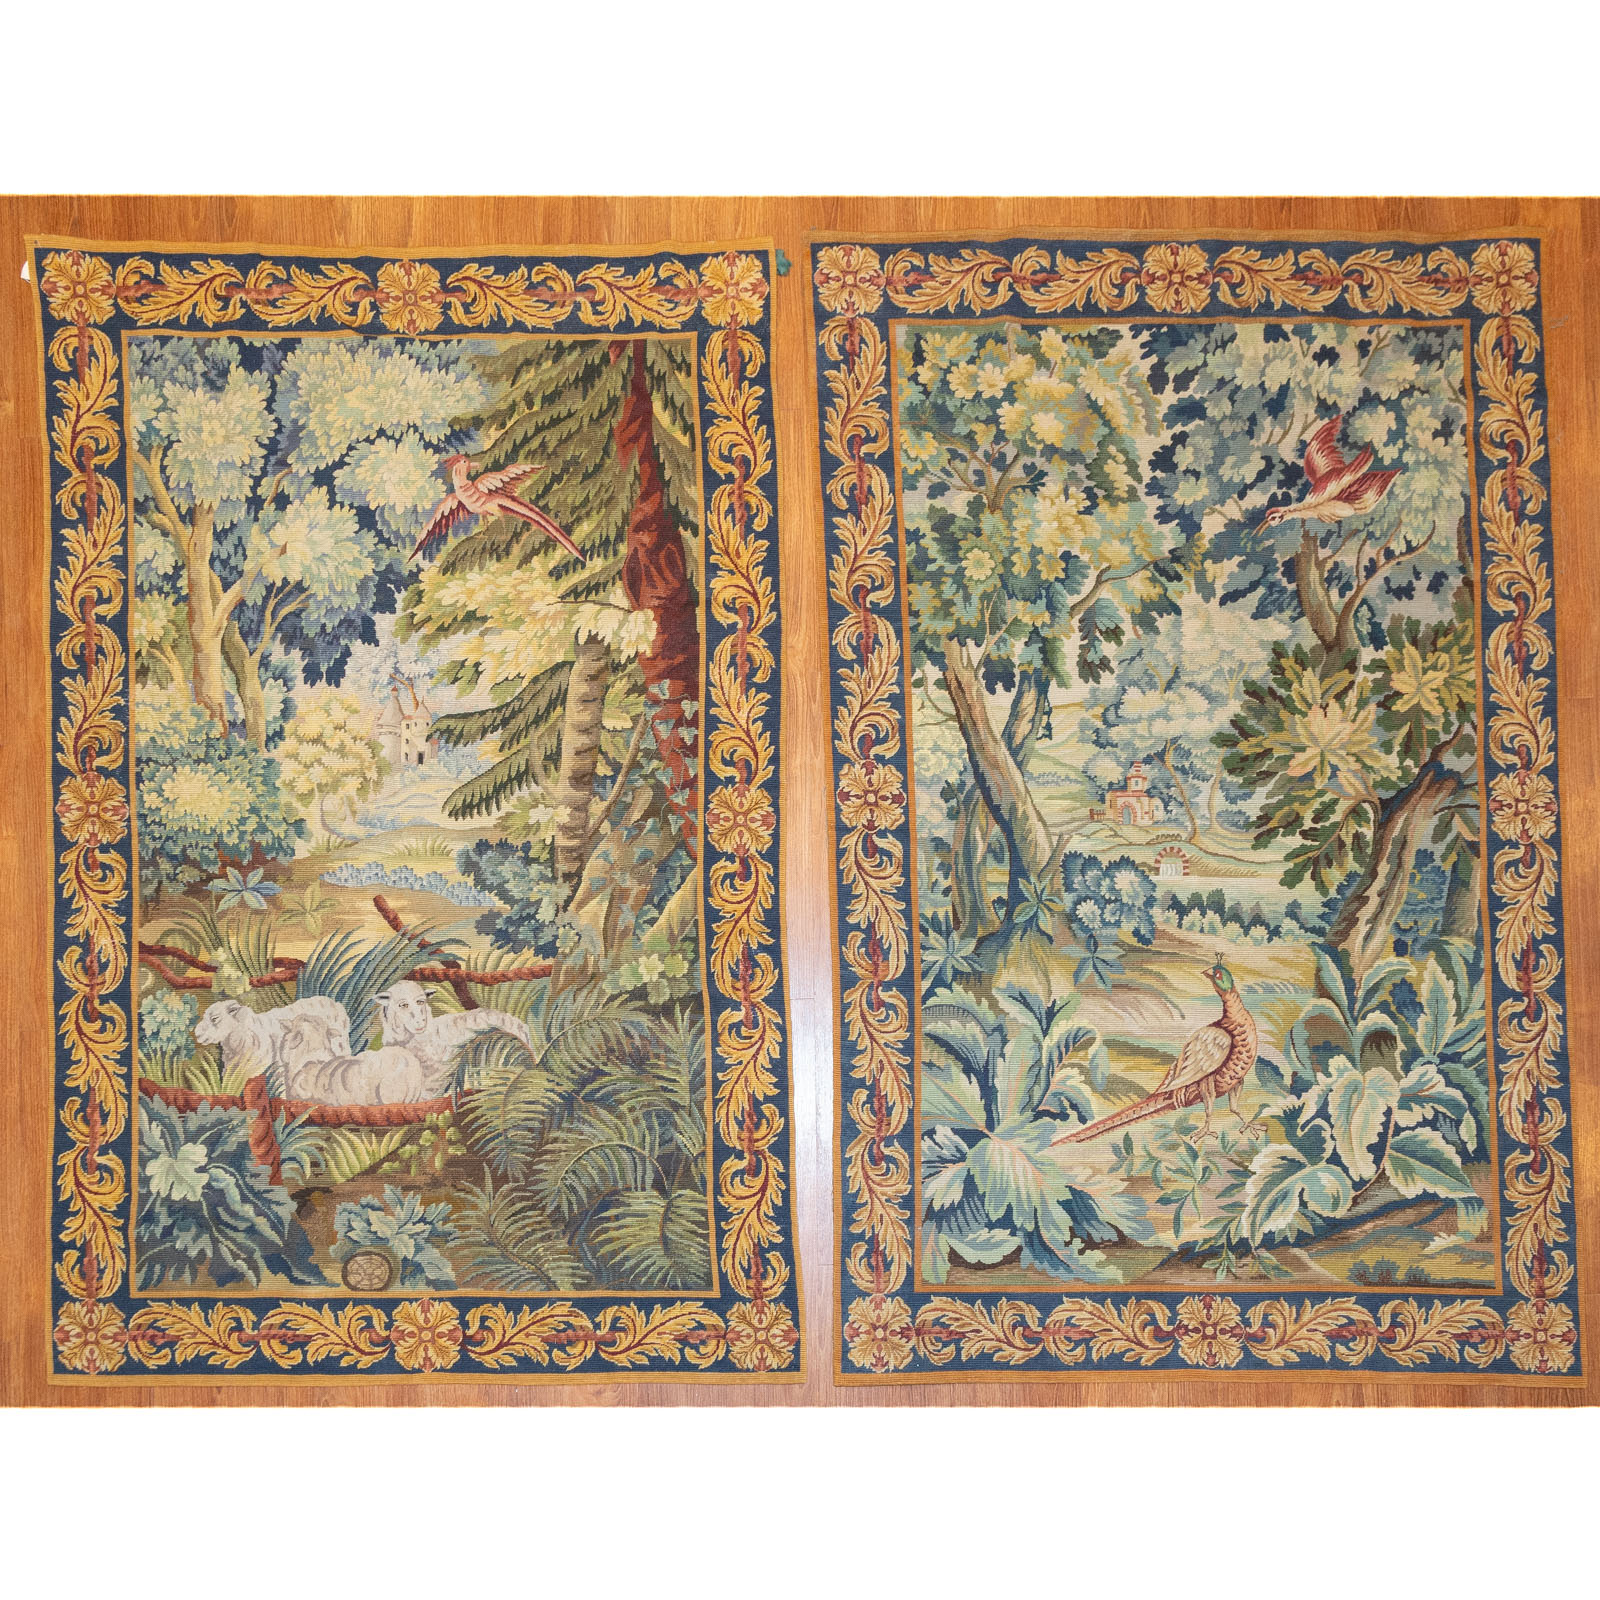 A PAIR OF FLEMISH STYLE TAPESTRIES,